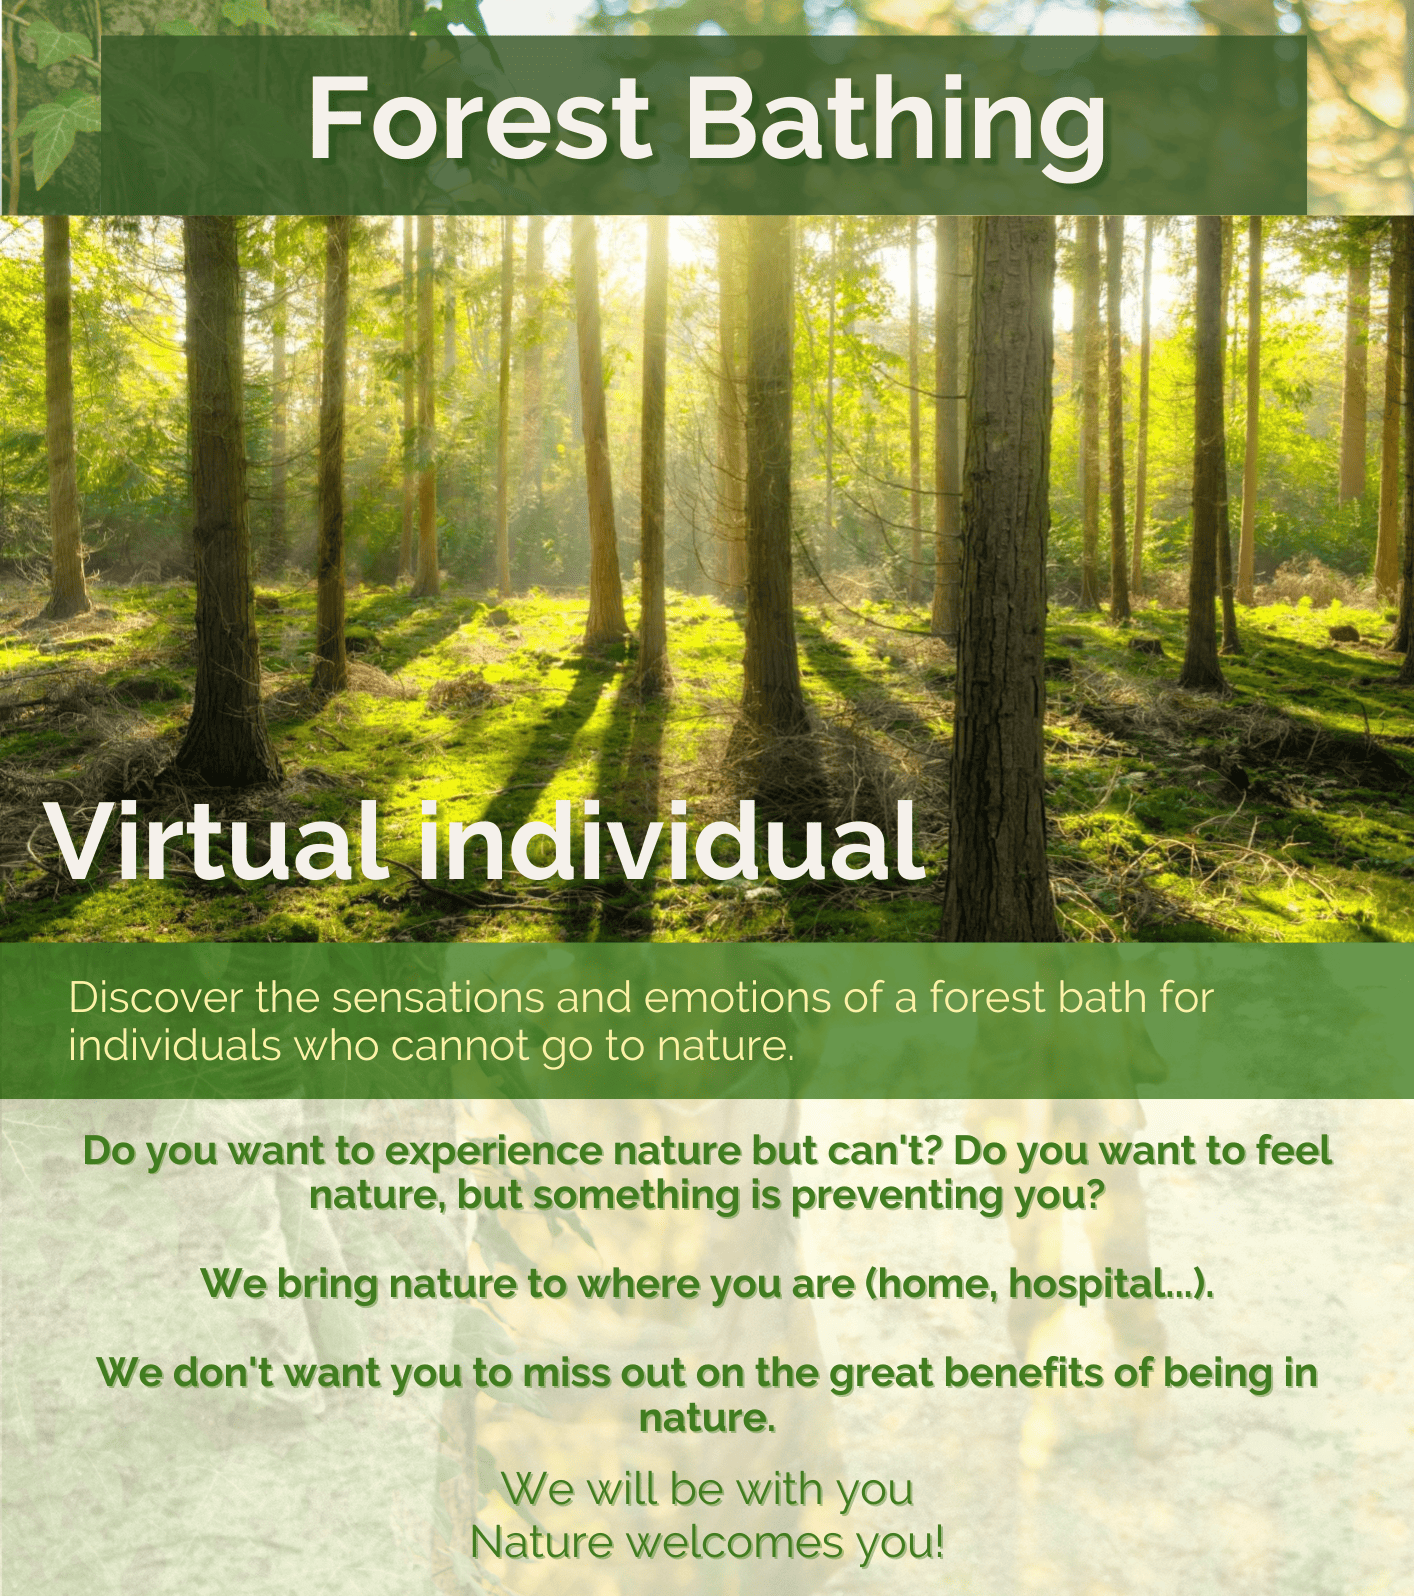 Forest Bathing virtual individual